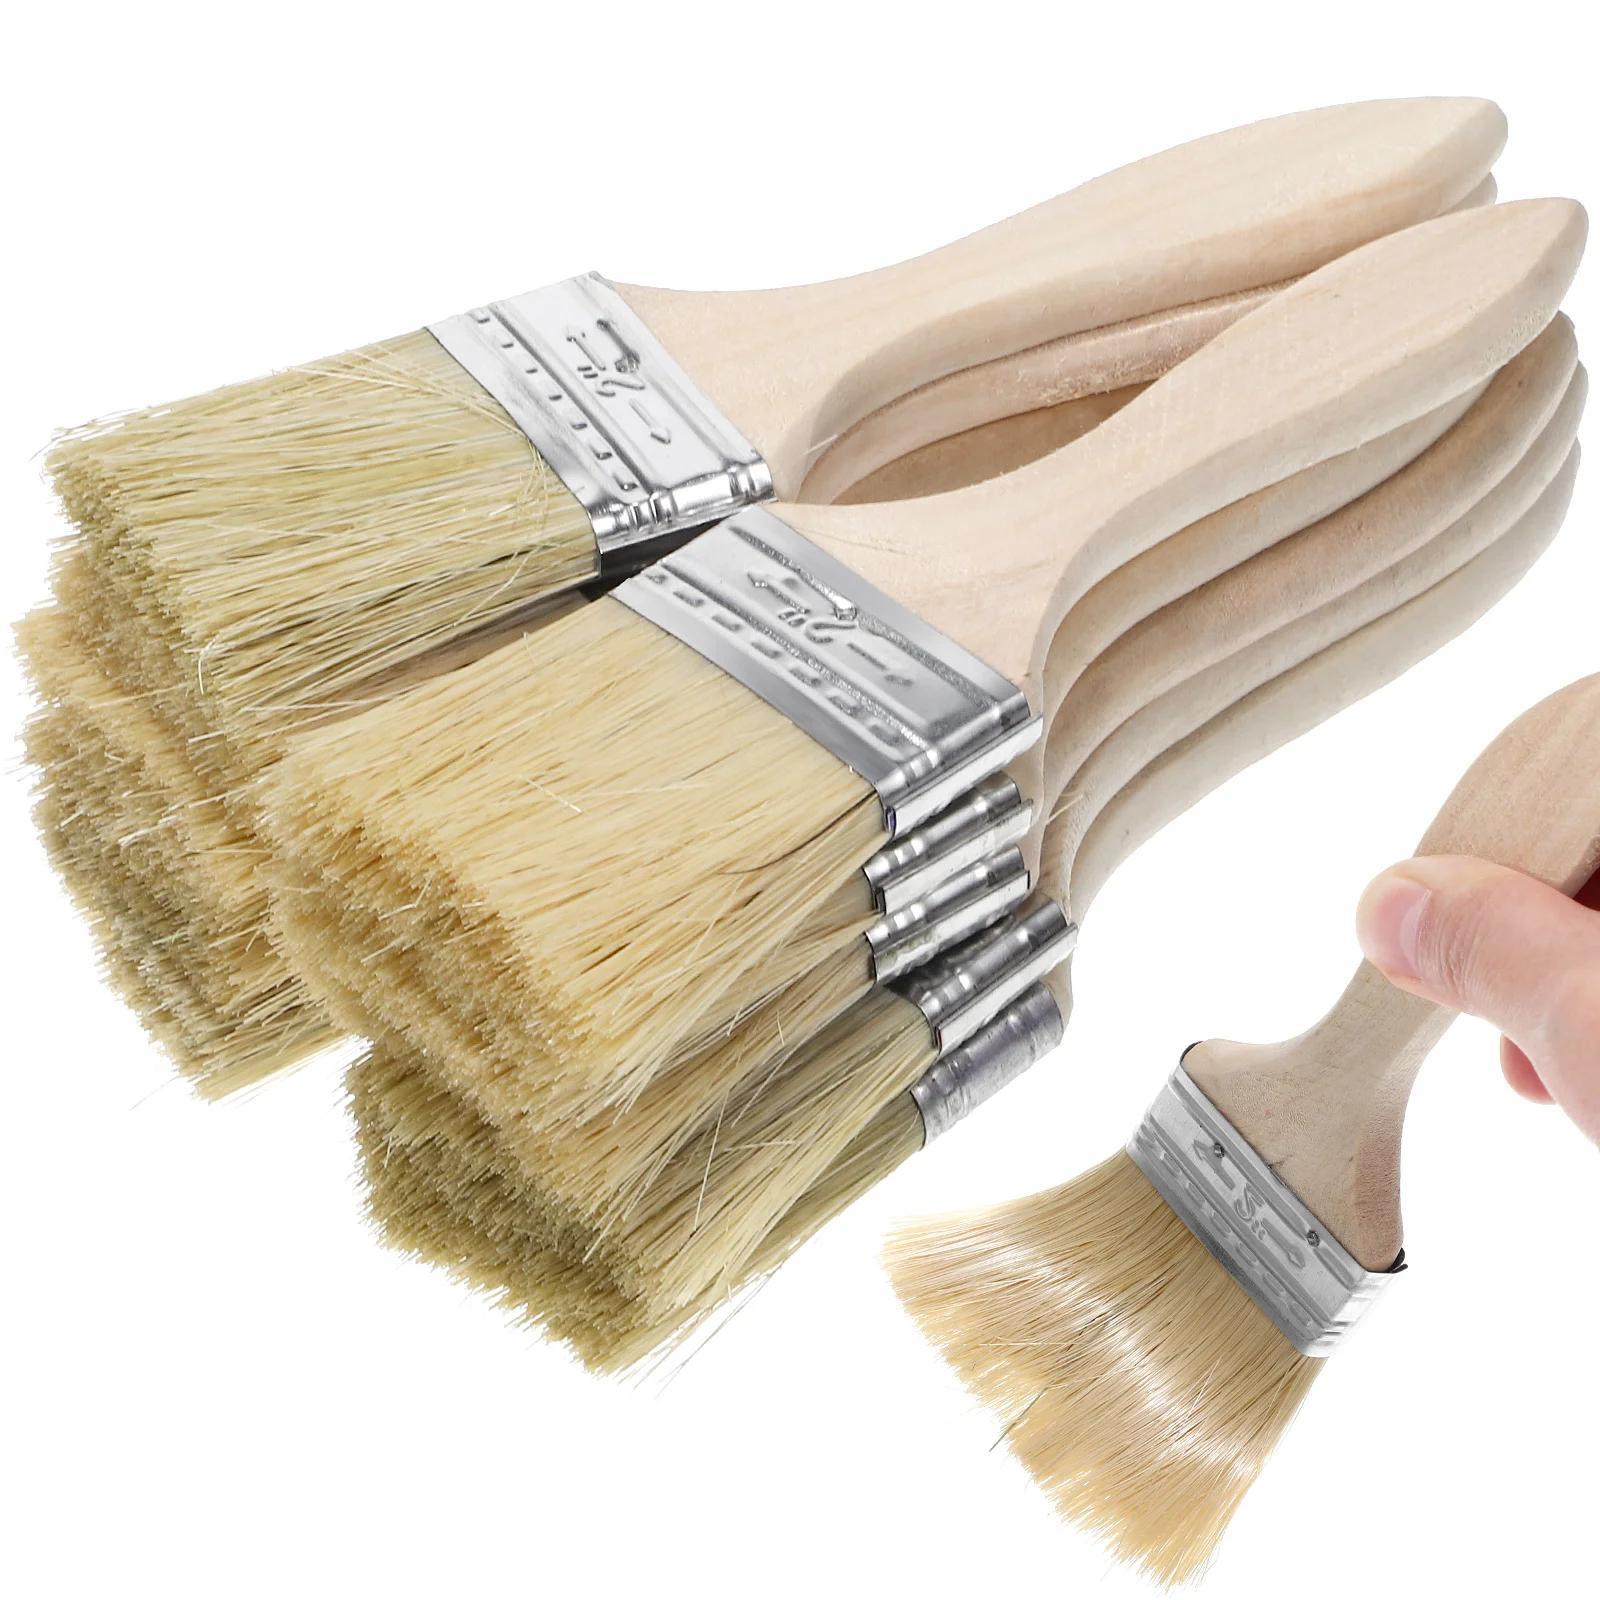 

10 Pcs Thickened Wooden Handle Paint Brush Chip Brushes Pastry for Oil Walls Grilling Butter Set Cleaning Stencil